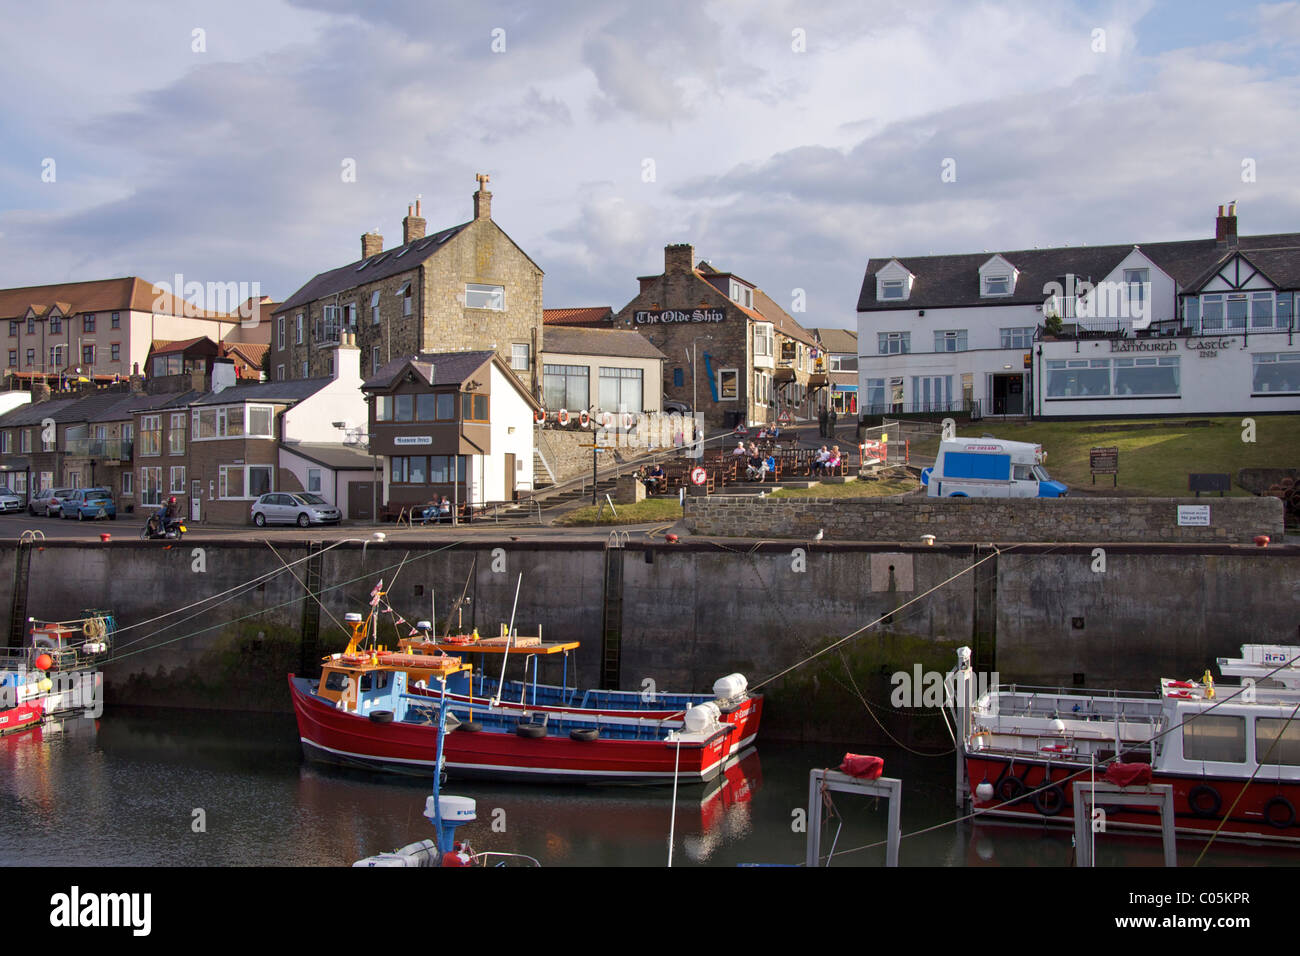 The harbour at Seahouses with the 'Bamburgh Castle' and 'Olde Ship' Inn on the quayside with boats moored in the harbour Stock Photo